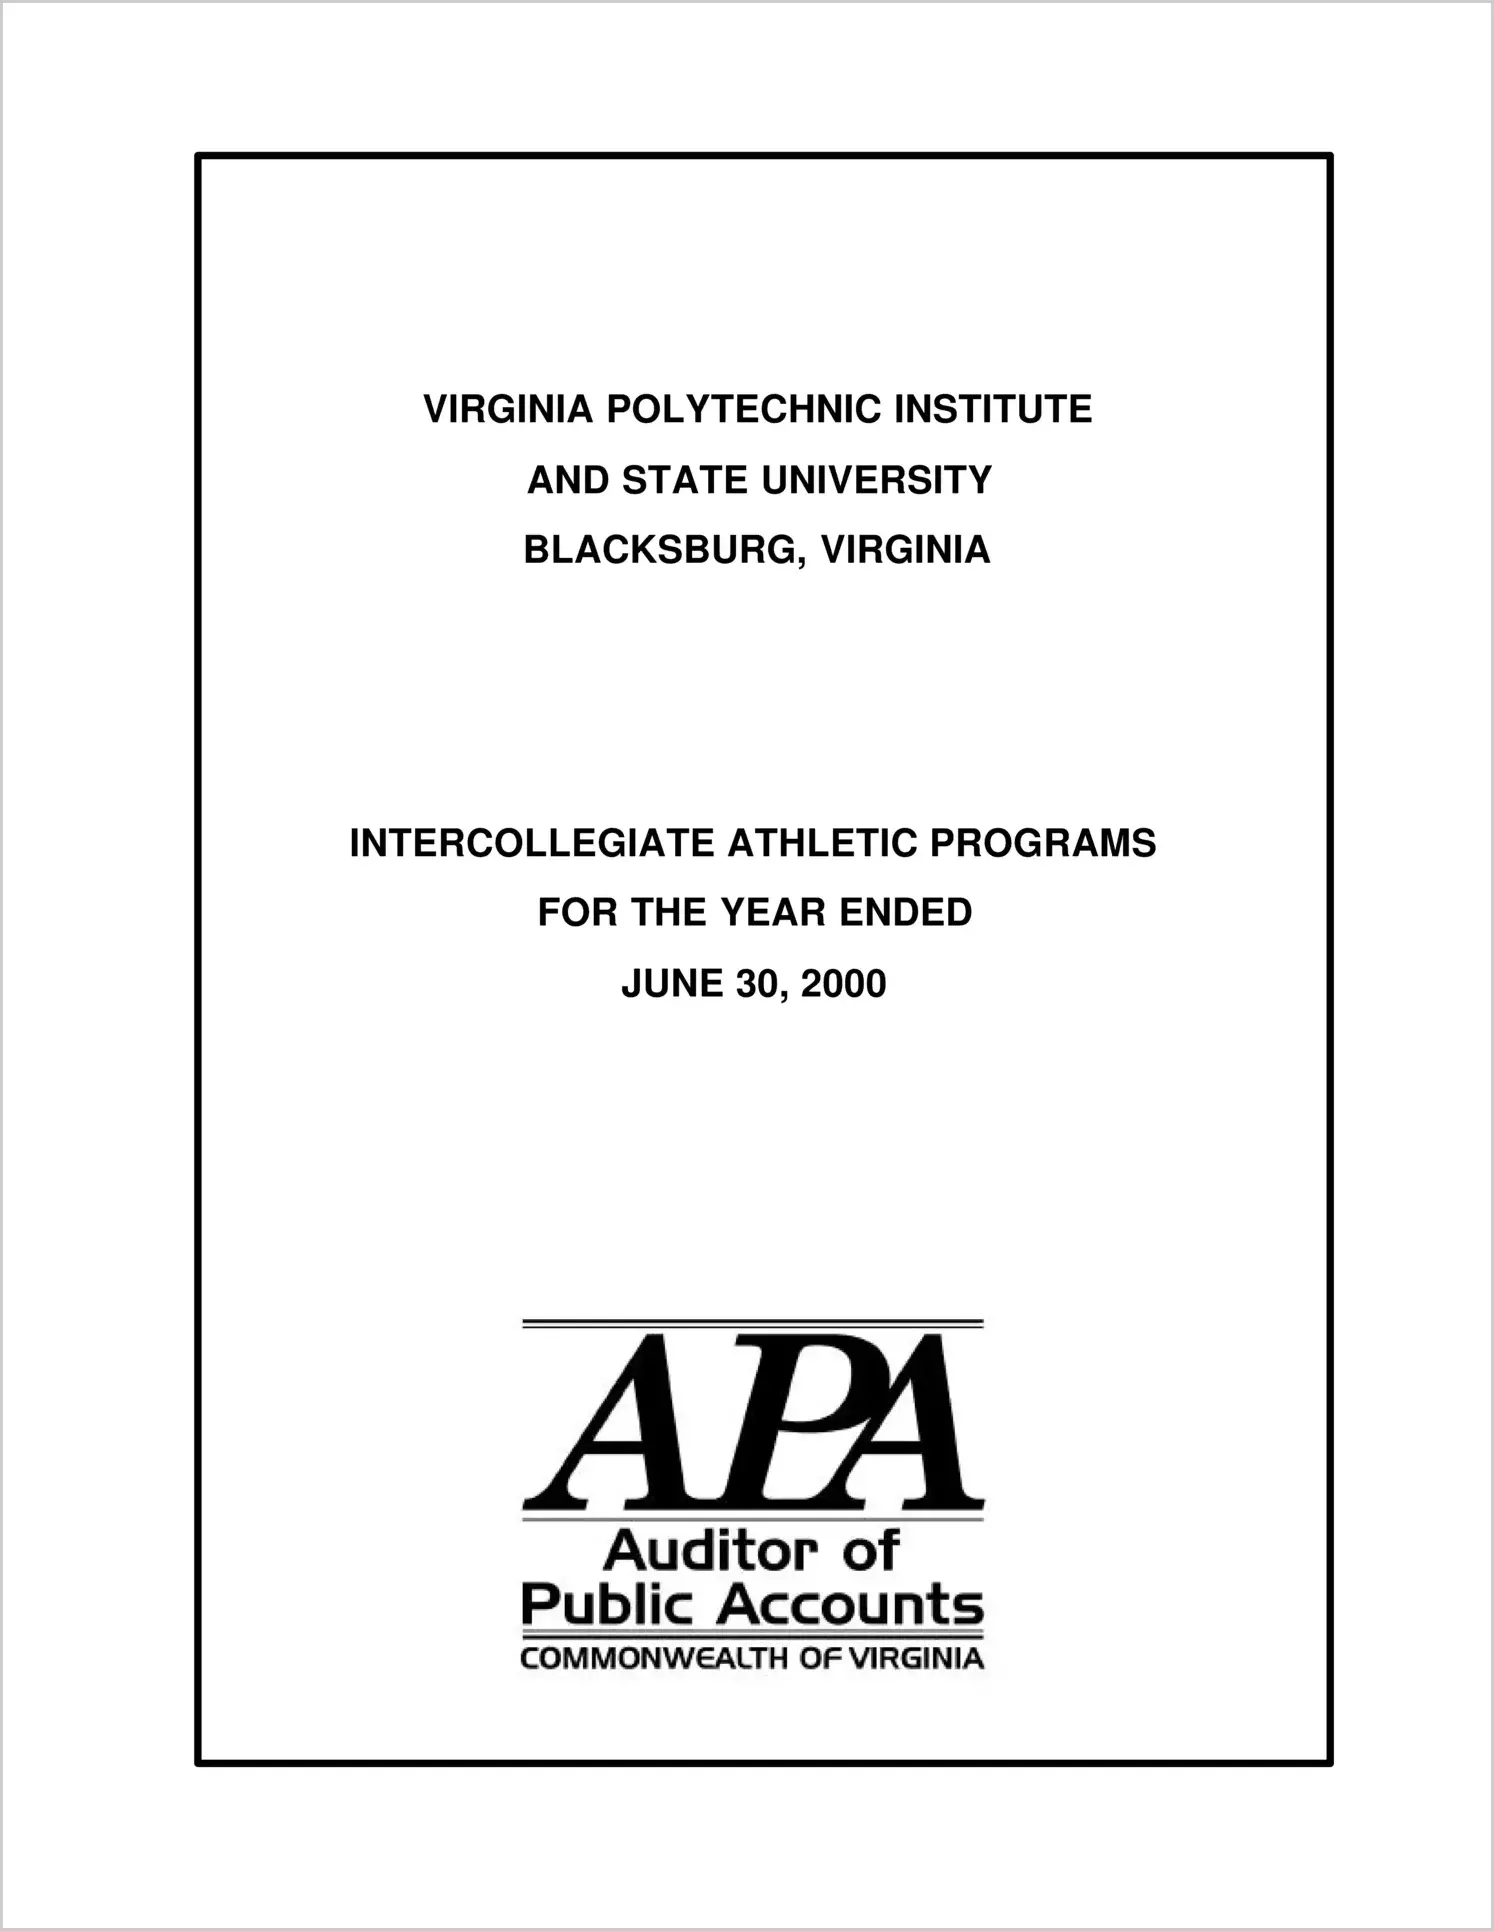 Virginia Polytechnic Institute and State University Intercollegiate Athletic Programs for the year ended June 30, 2000